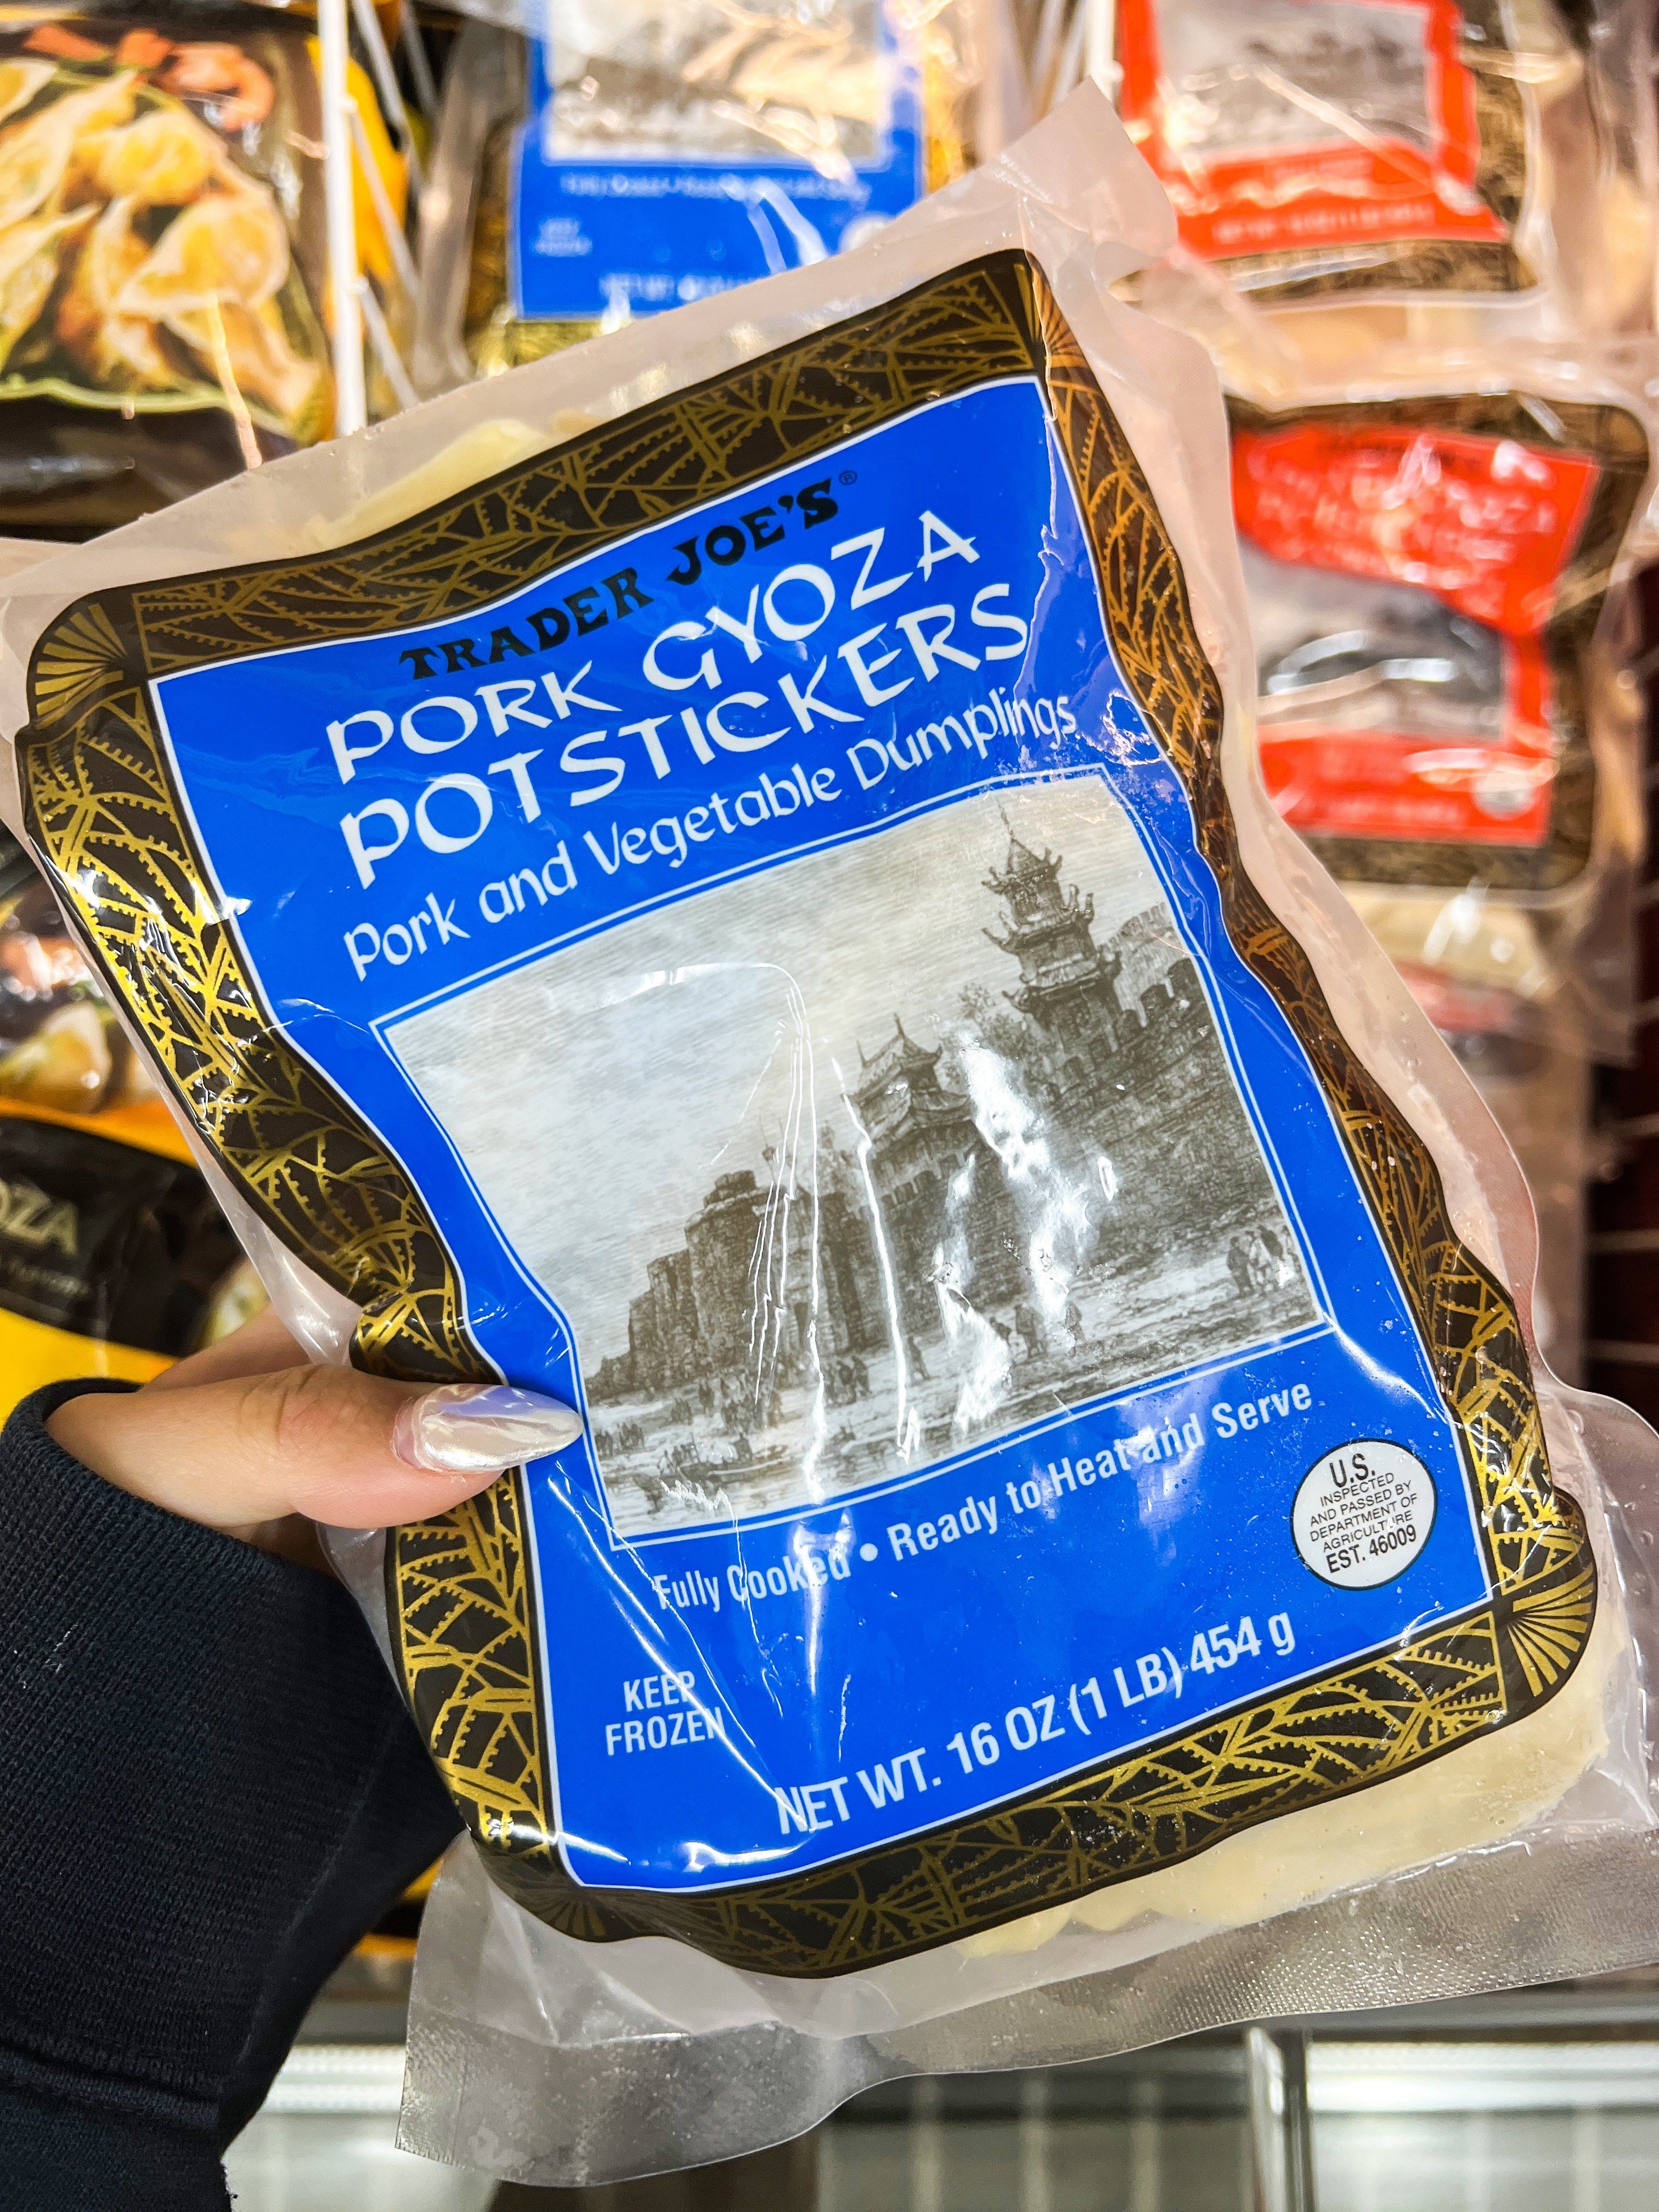 The 62 Most Popular Trader Joe's Frozen Foods, Ranked From Worst To Best